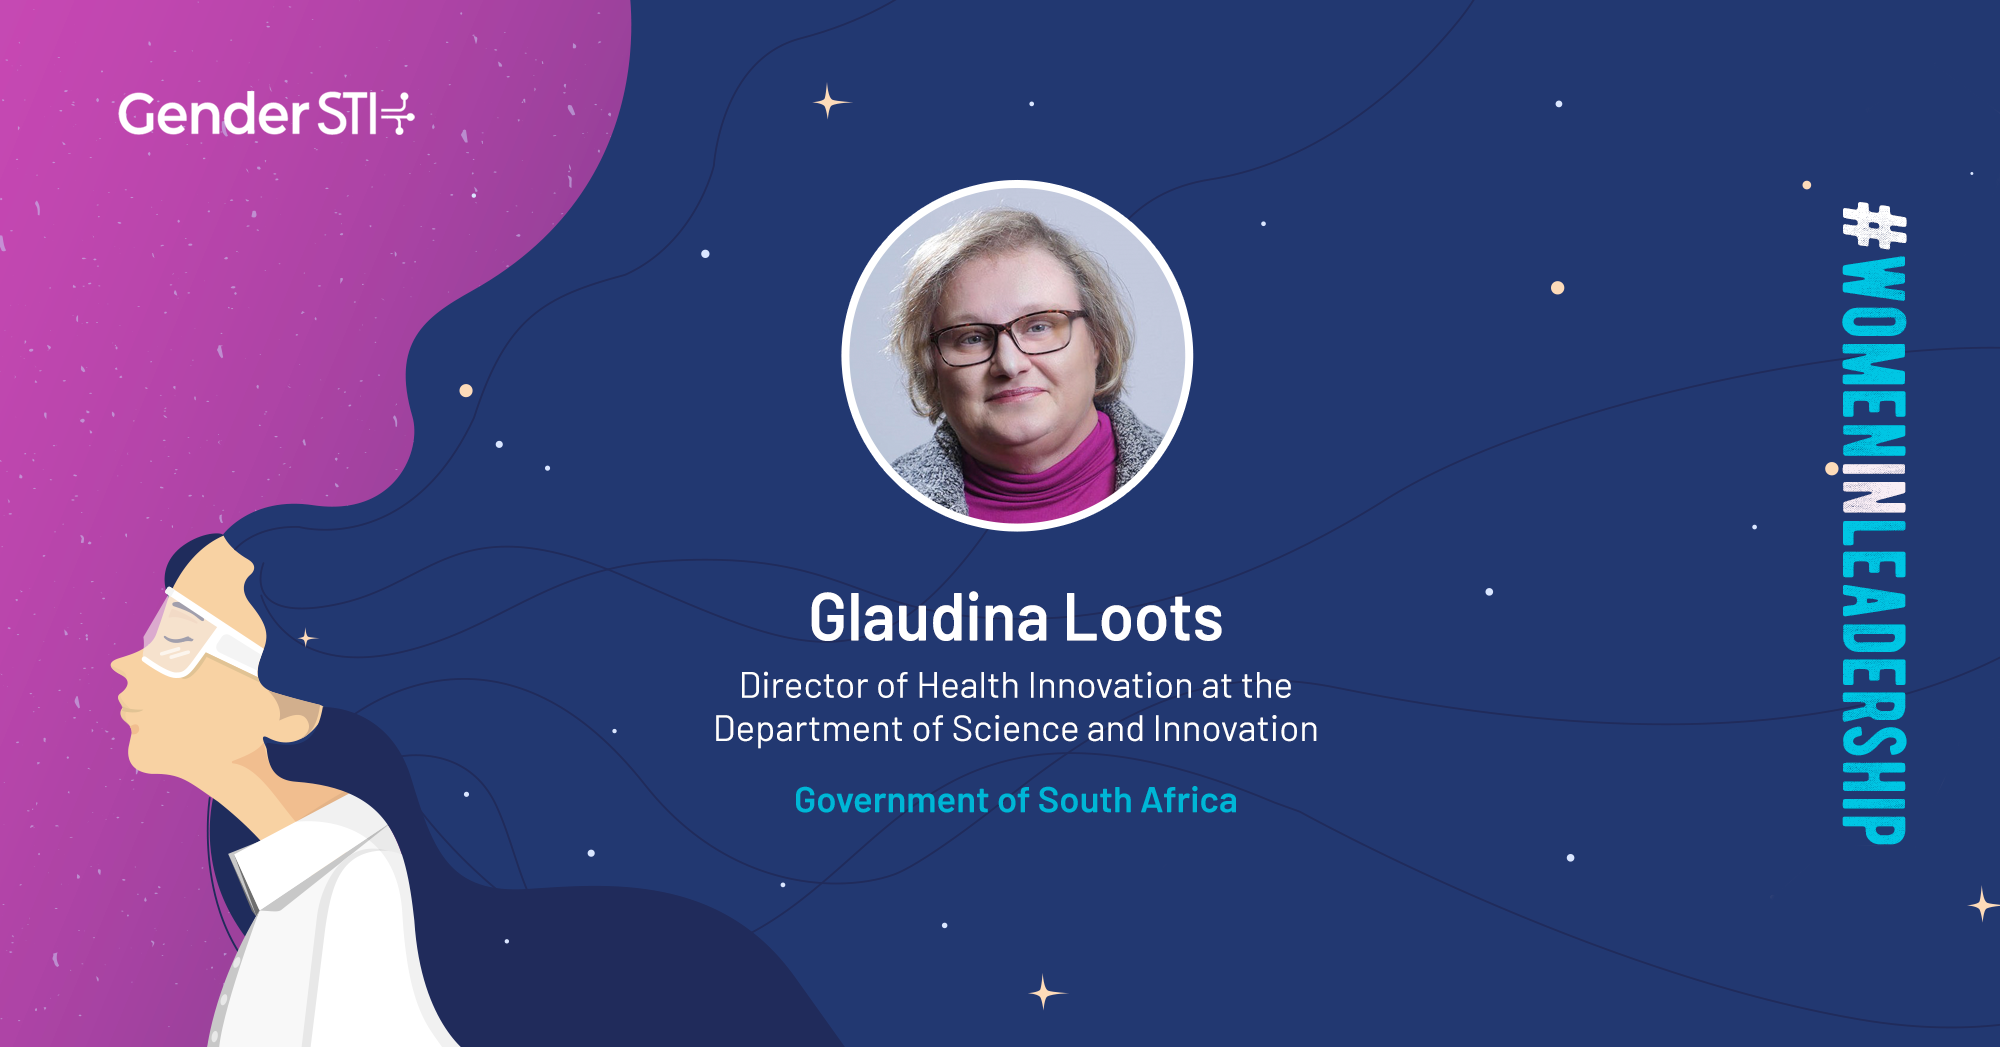 Glaudina Loots, Director for Health Innovation at the Department of Science and Innovation in South Africa, is one of Gender STI's #WomenInLeadership nominees.